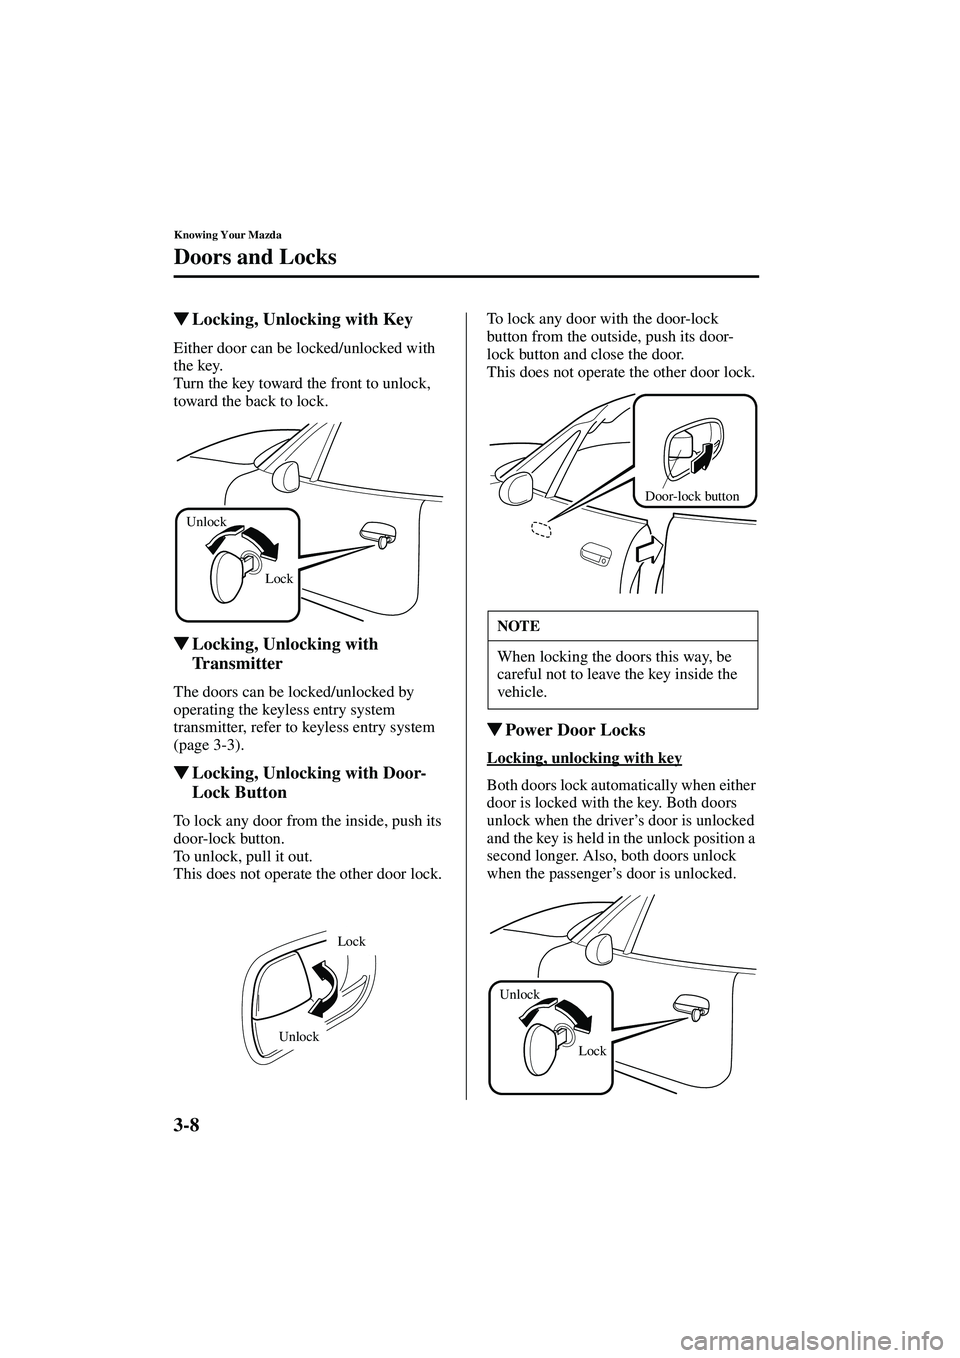 MAZDA MODEL MX-5 MIATA 2003  Owners Manual 3-8
Knowing Your Mazda
Doors and Locks
Form No. 8R09-EA-02G
Locking, Unlocking with Key
Either door can be locked/unlocked with 
the key.
Turn the key toward the front to unlock, 
toward the back to 